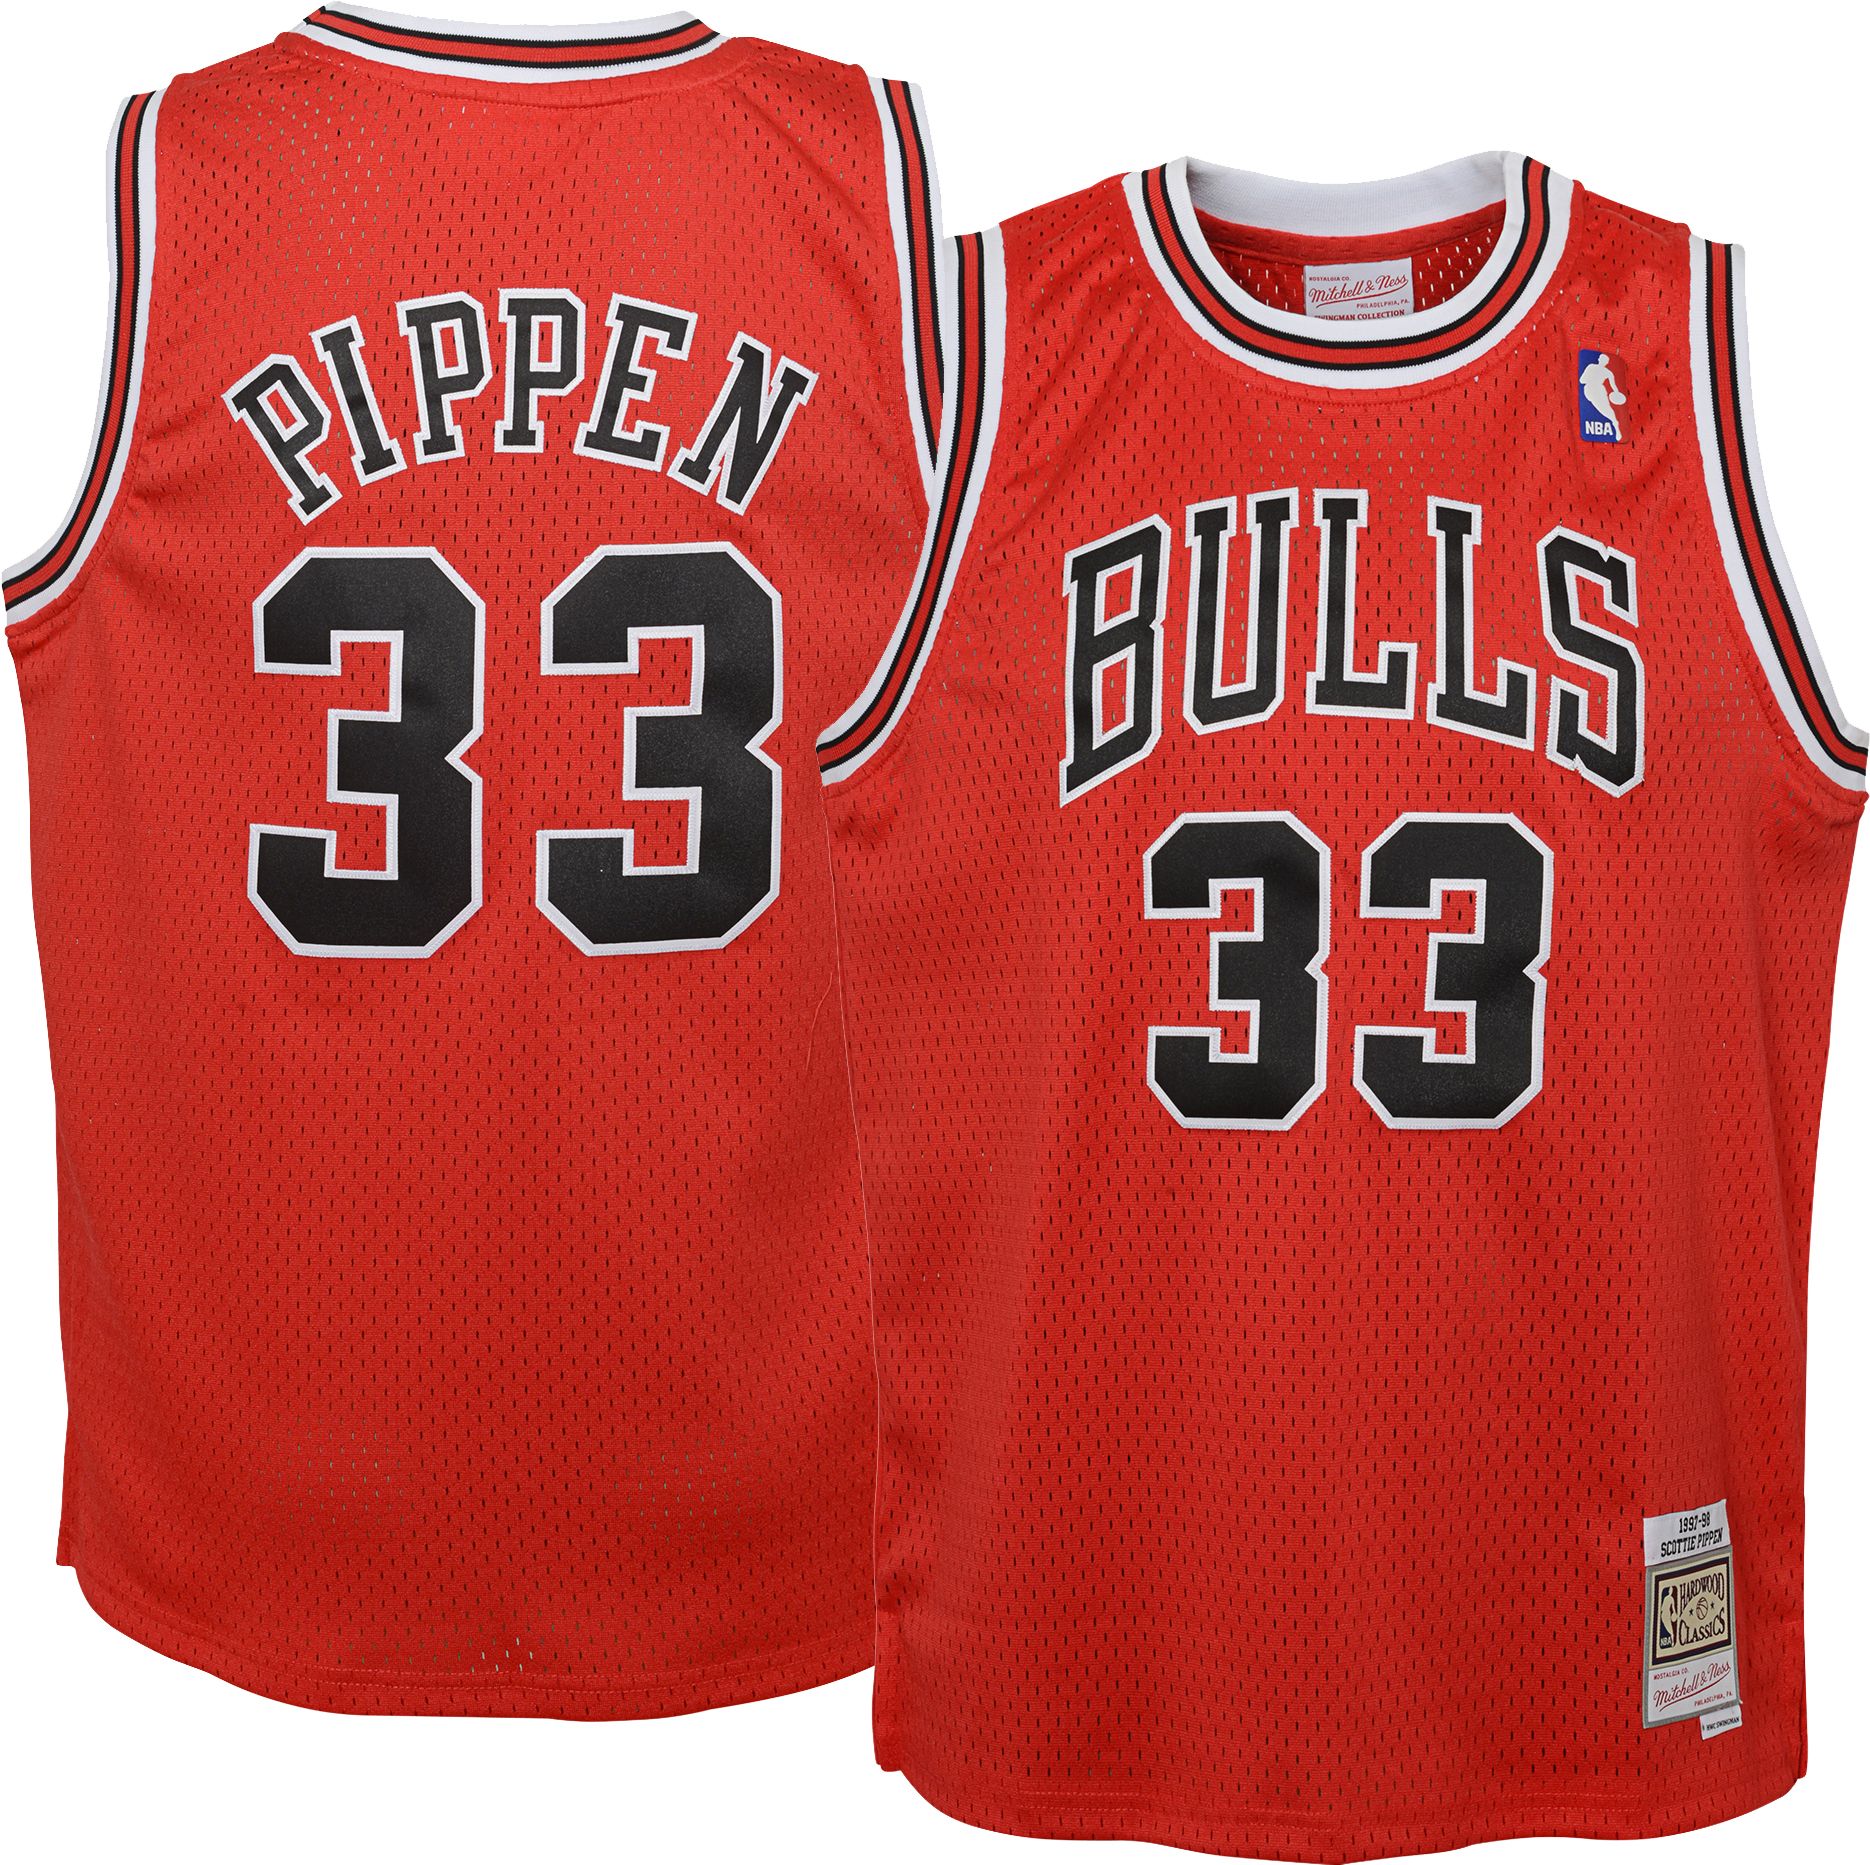 youth chicago bulls jersey Off 62% - www.bashhguidelines.org